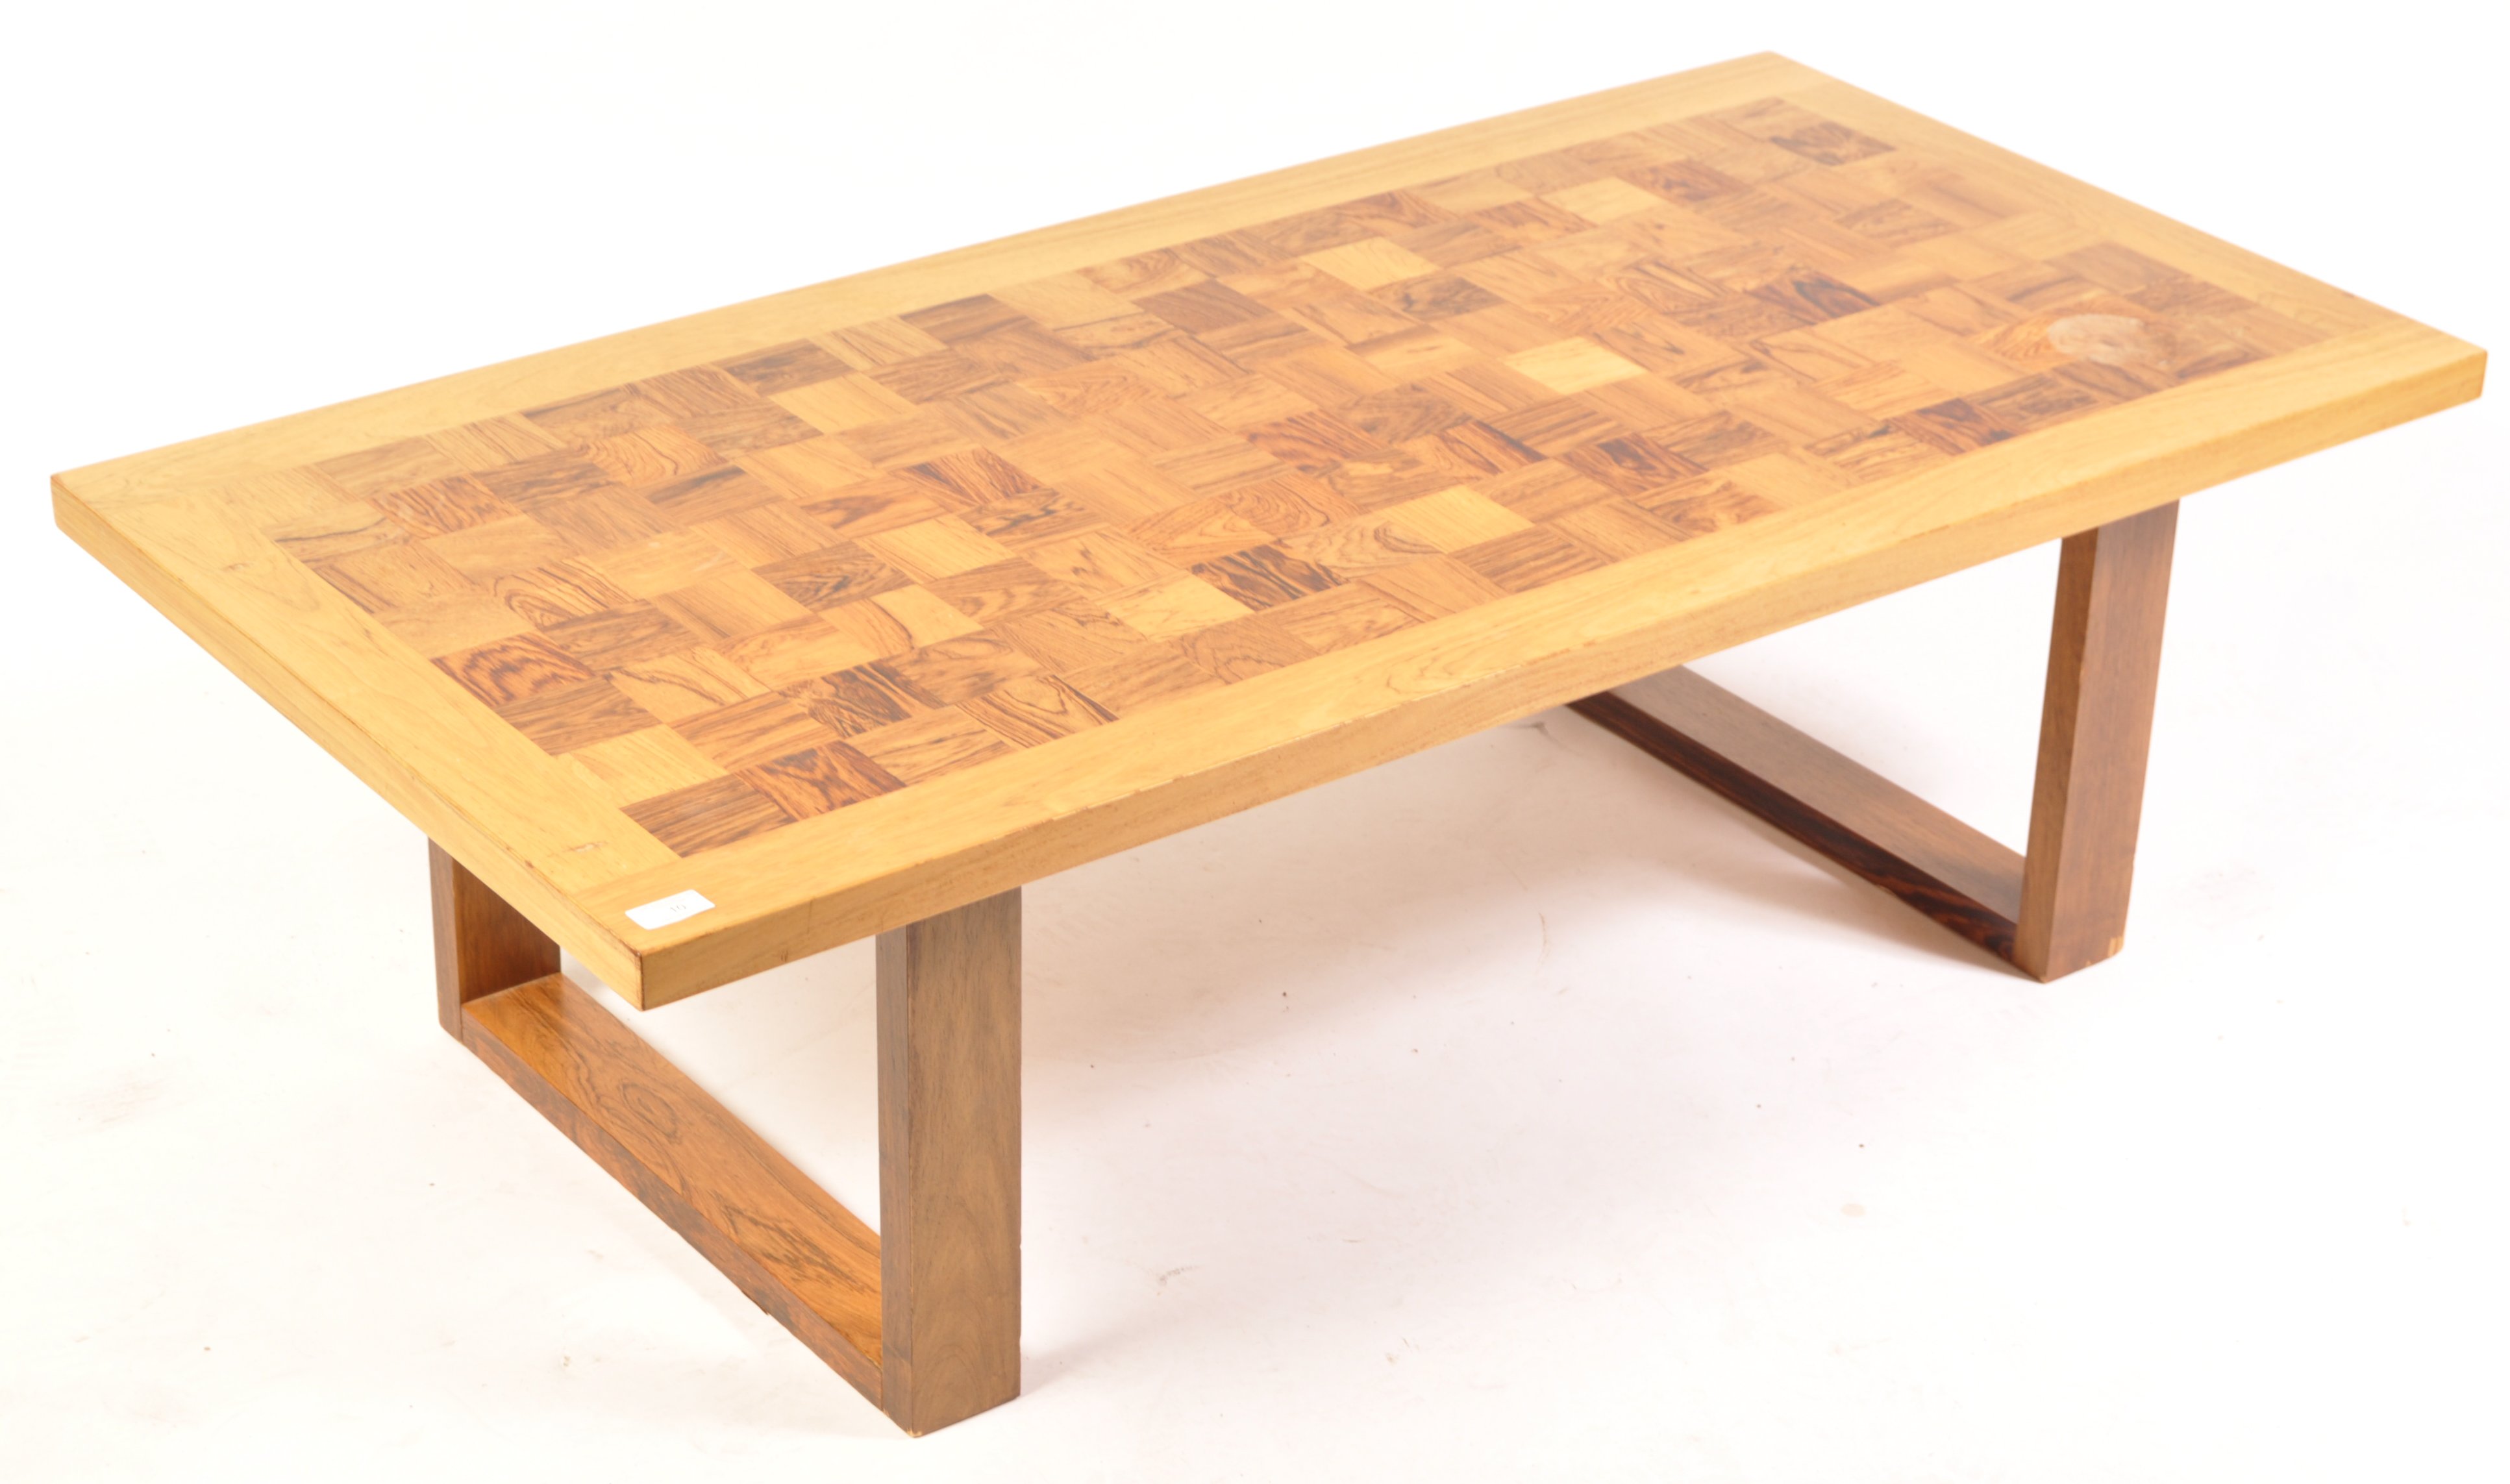 CADO VINTAGE DANISH PARQUETRY TOPPED COFFEE TABL:E - Image 2 of 5